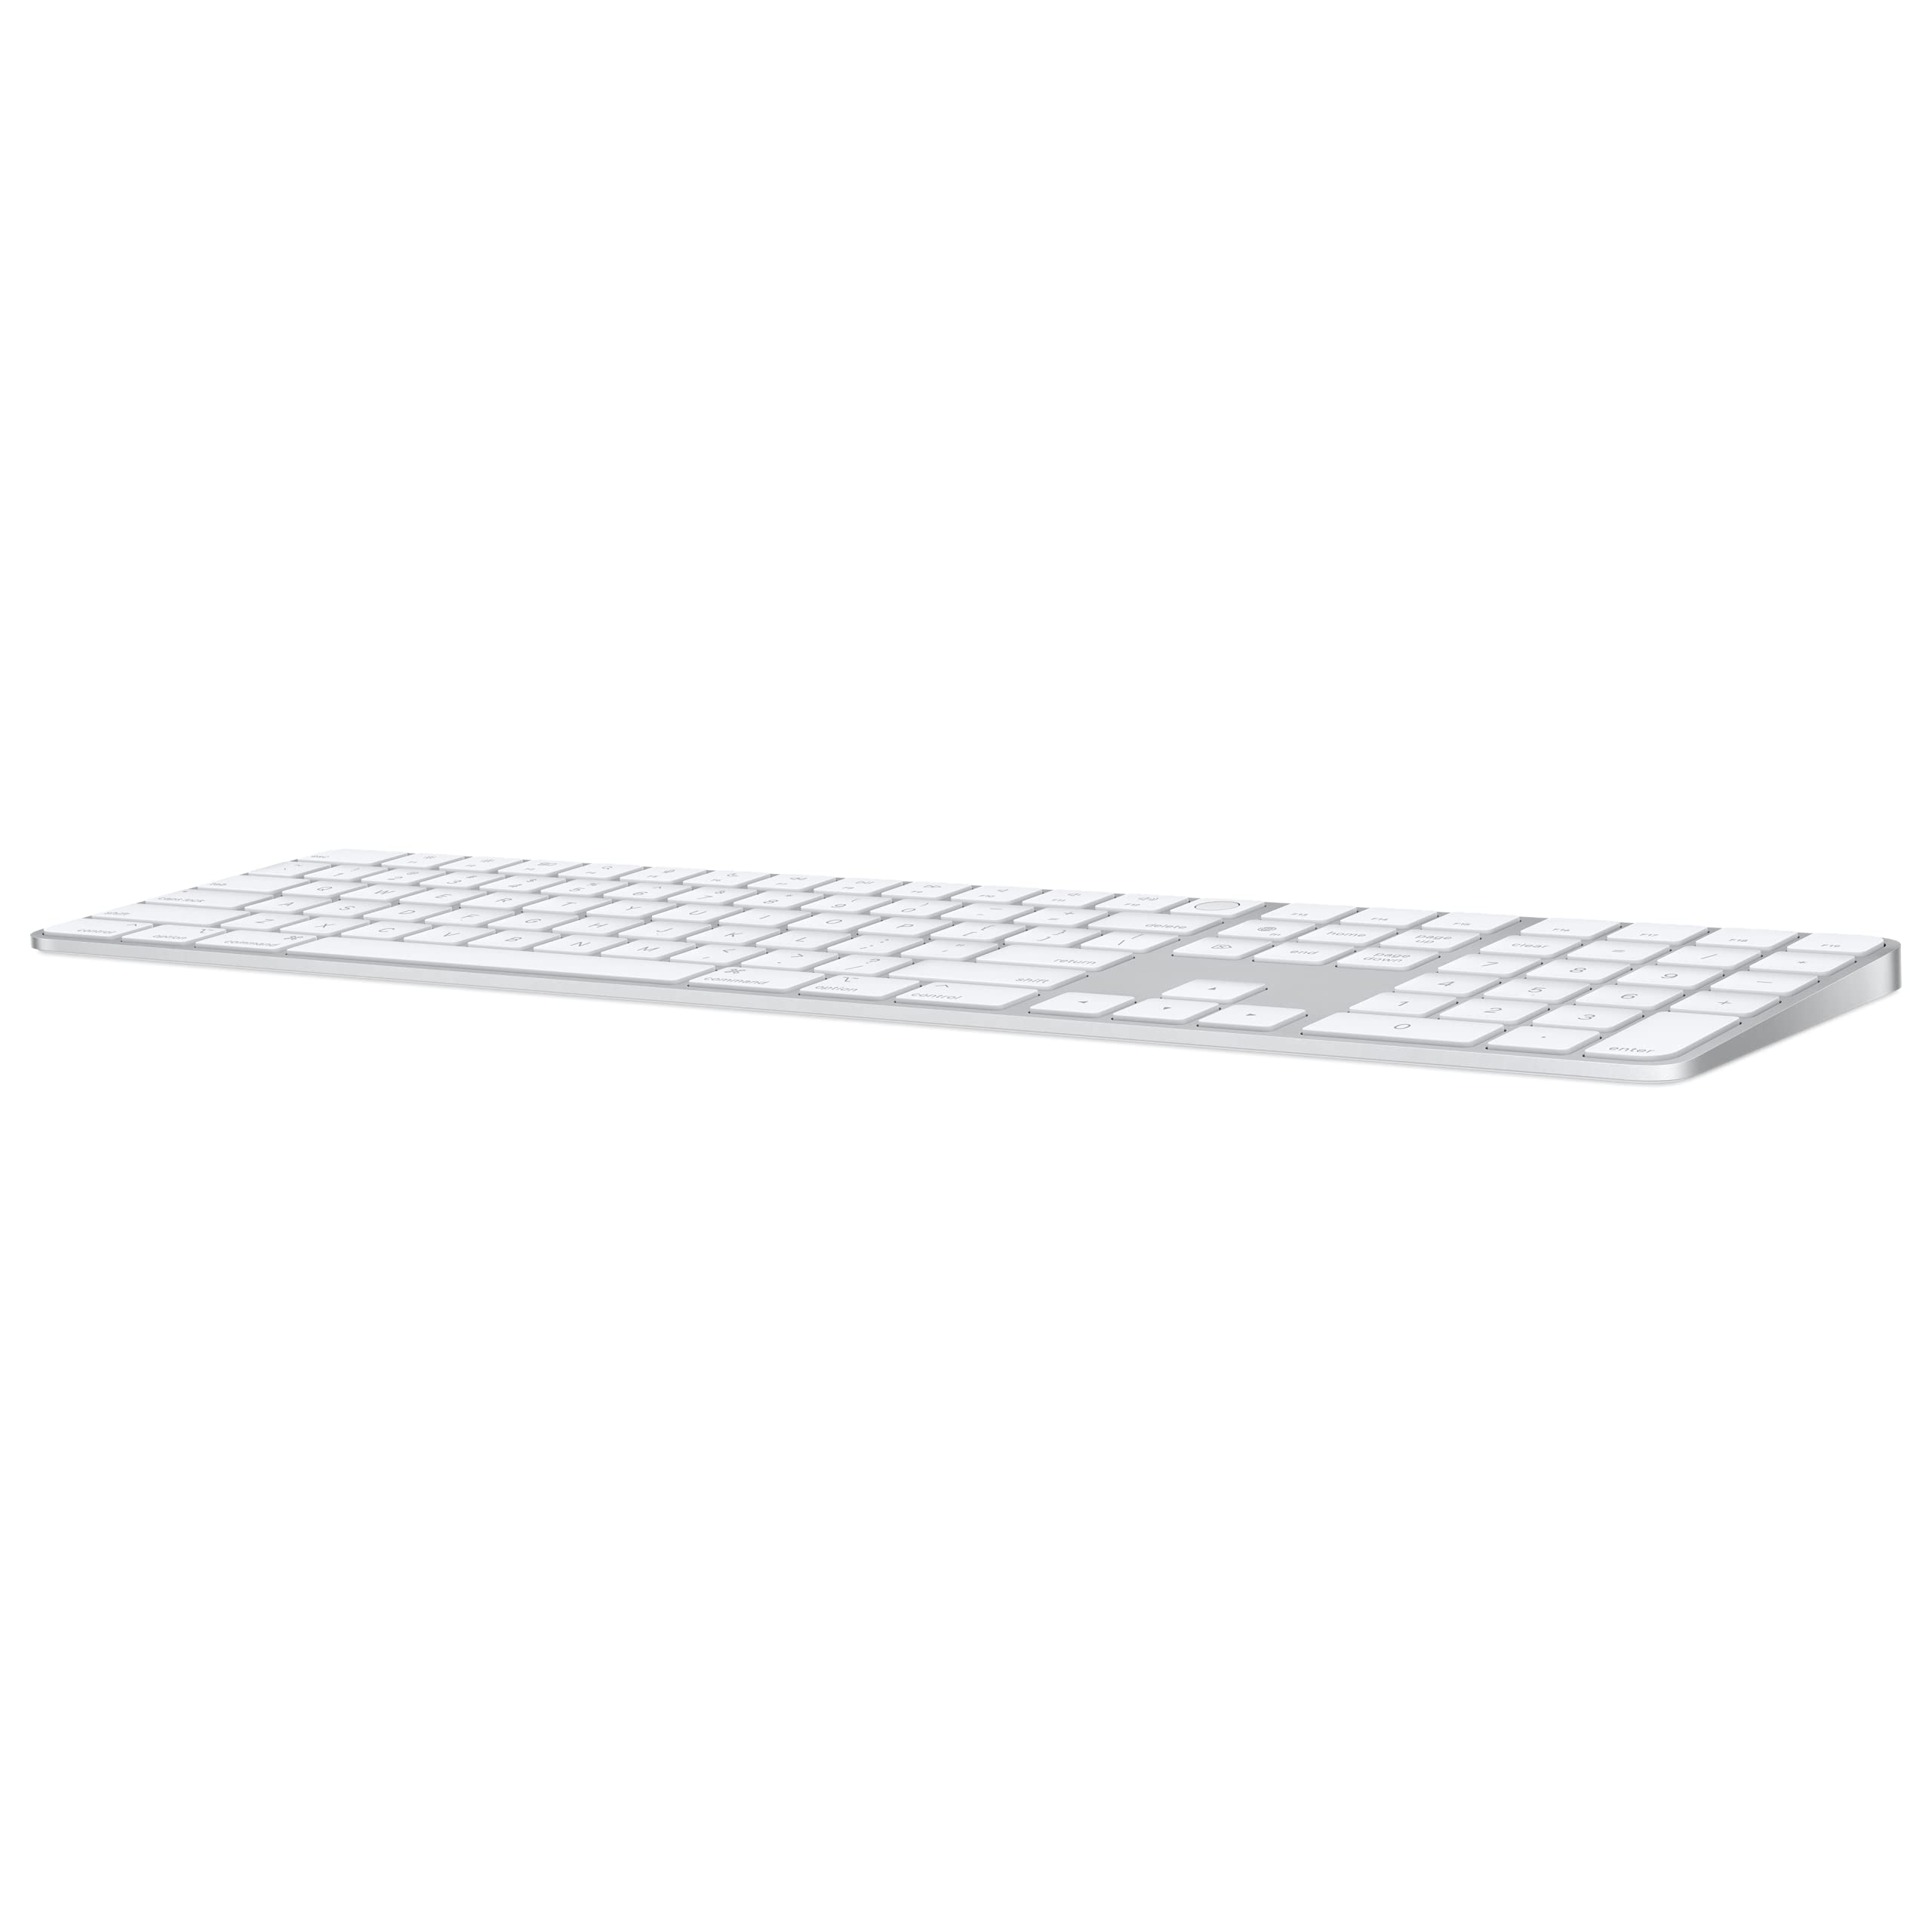 Apple Magic Keyboard with Touch ID and Numeric Keypad: Wireless, Bluetooth, Rechargeable. Works with Mac Computers with Apple Silicon; US English - White Keys